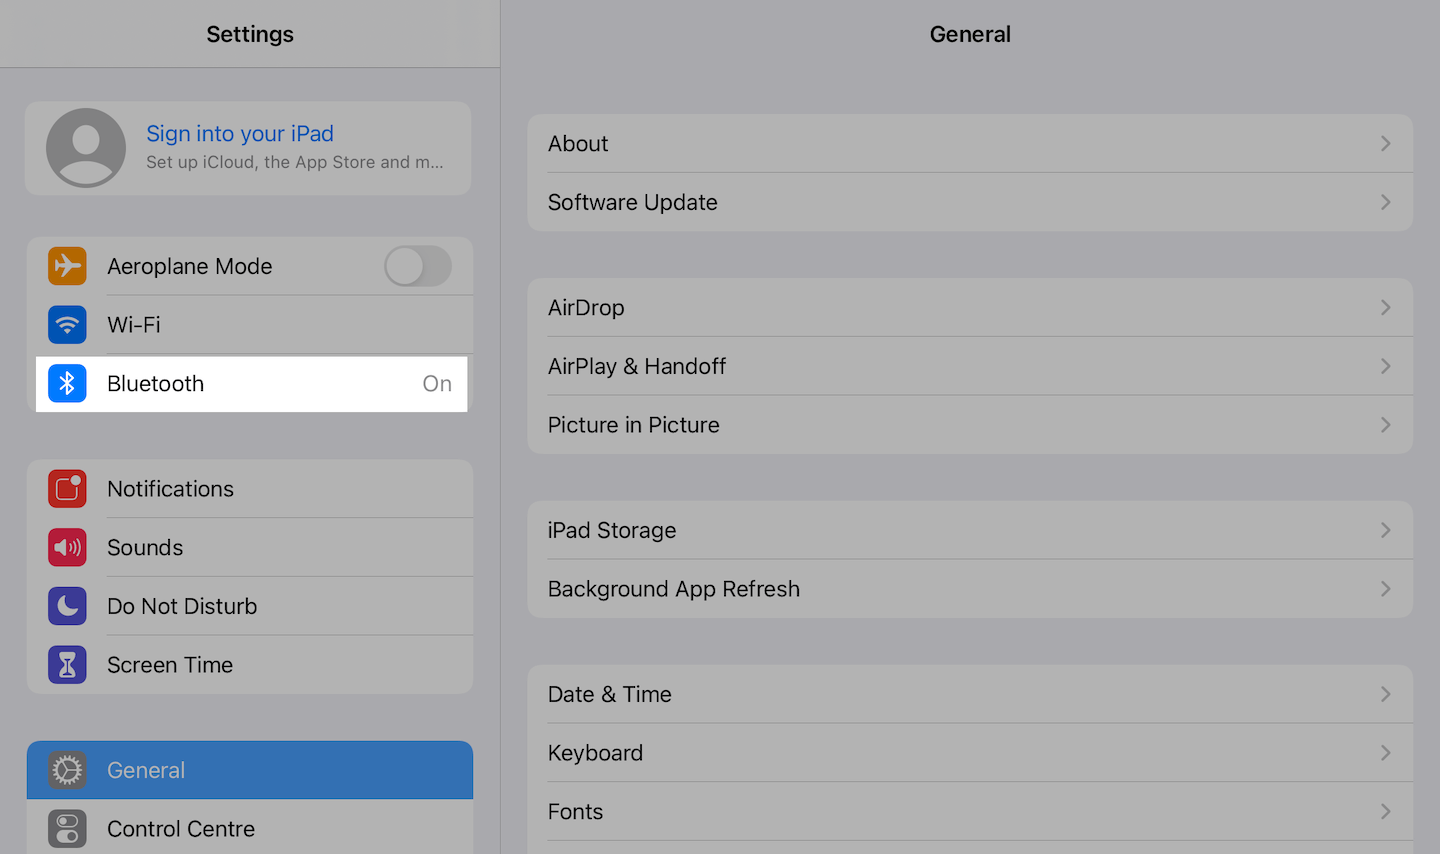 Settings
          page on the iPad, showing that Bluetooth is on.